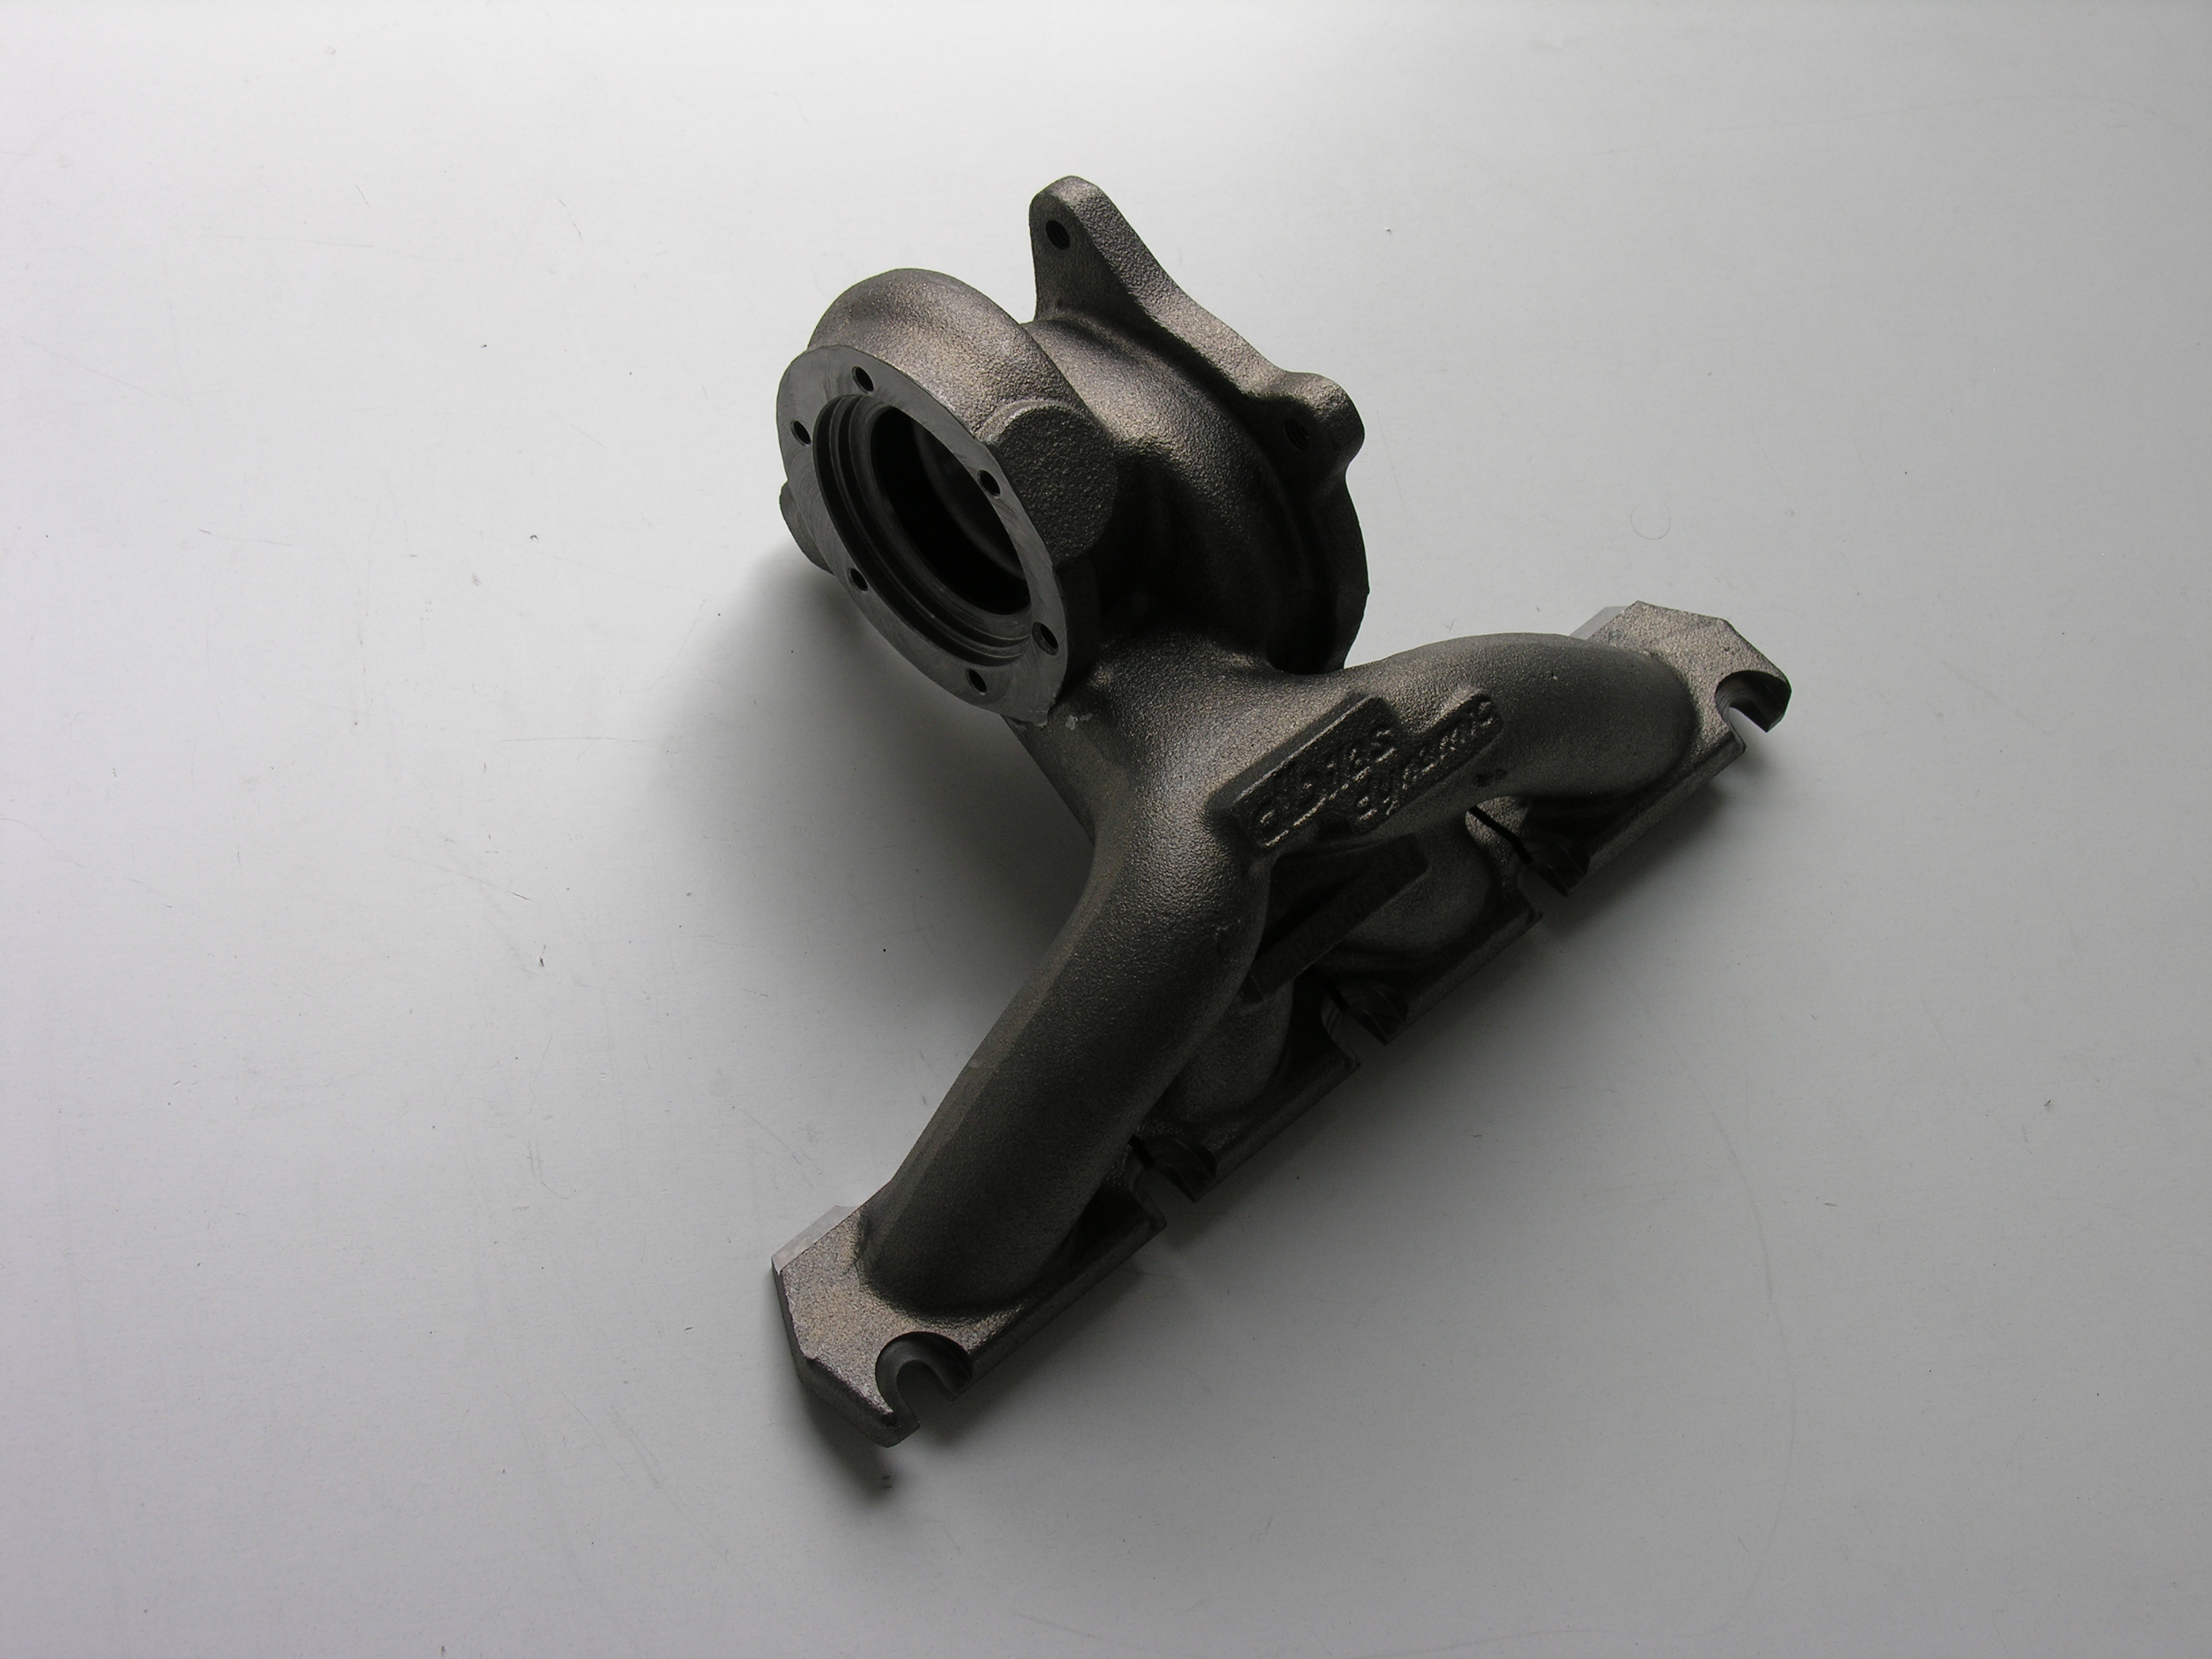 Stainless stell Turbo exhaust manifold with turbine housing  VW 2,0 TFSI group for GT28 Series ball bearing